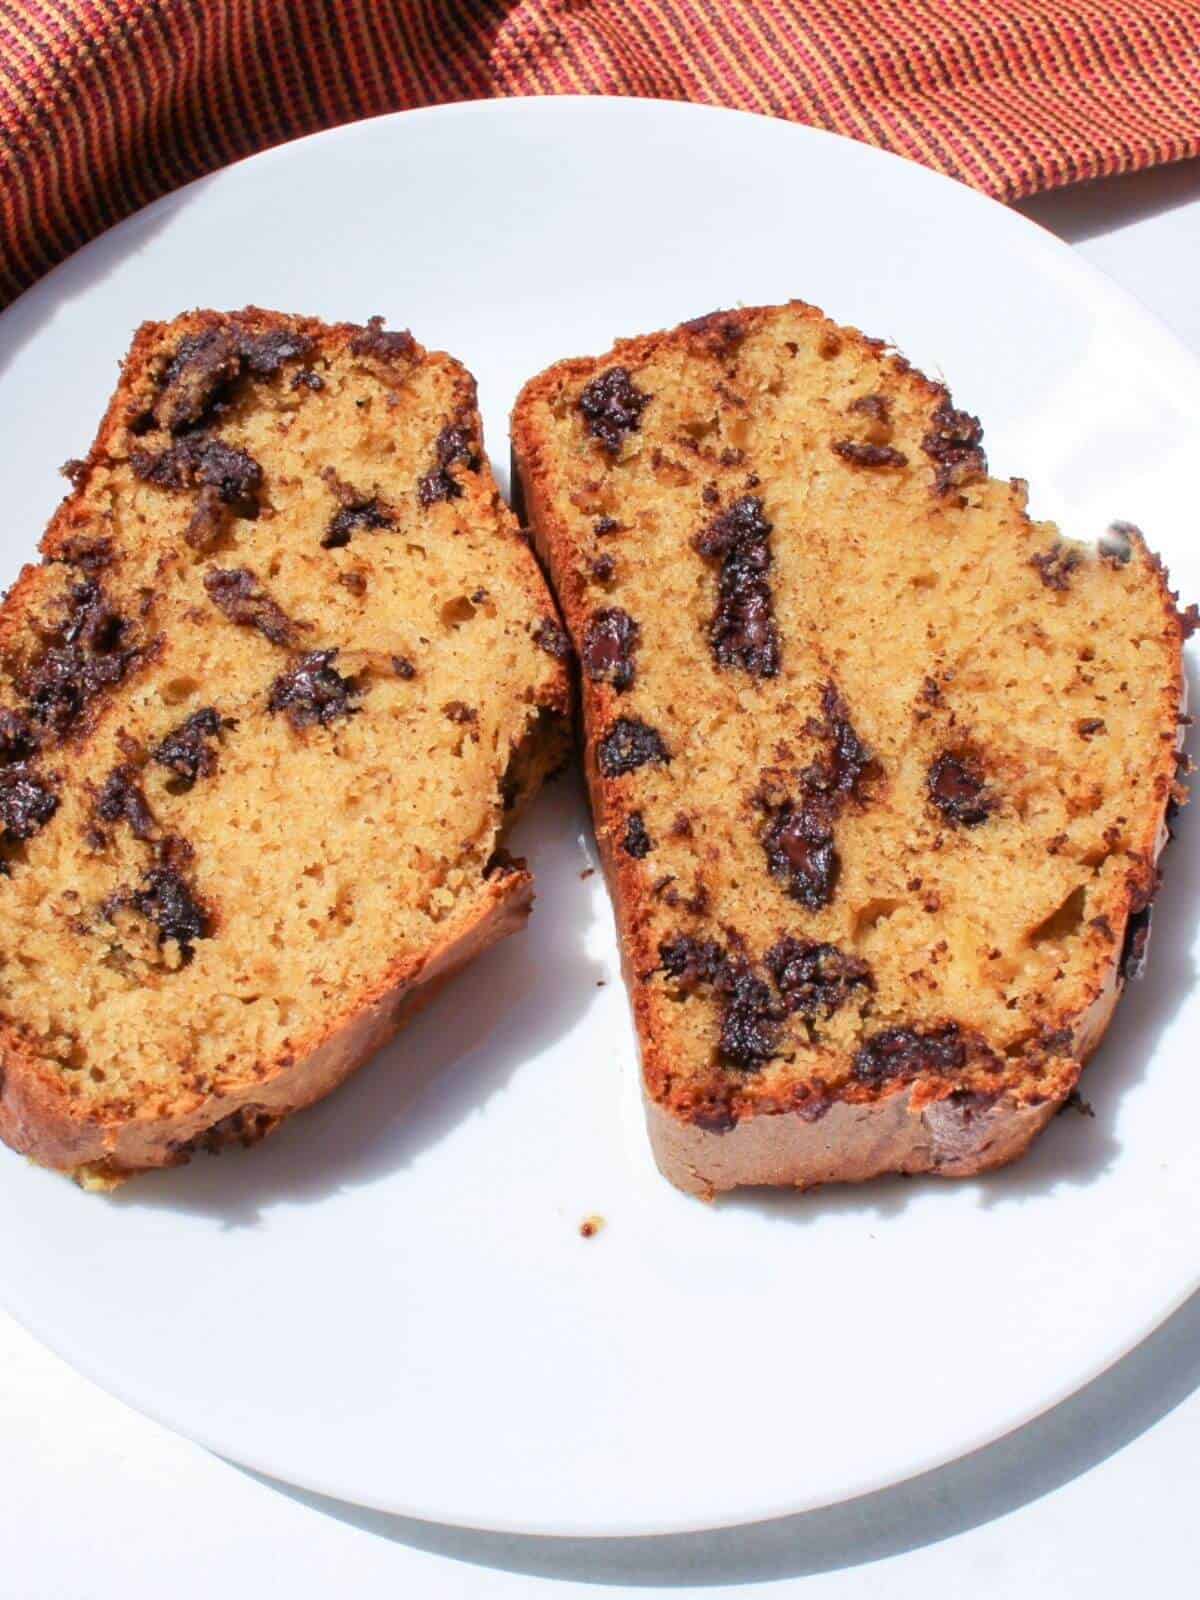 Overhead view of two slices of acorn squash bread laying flat on a white plate.